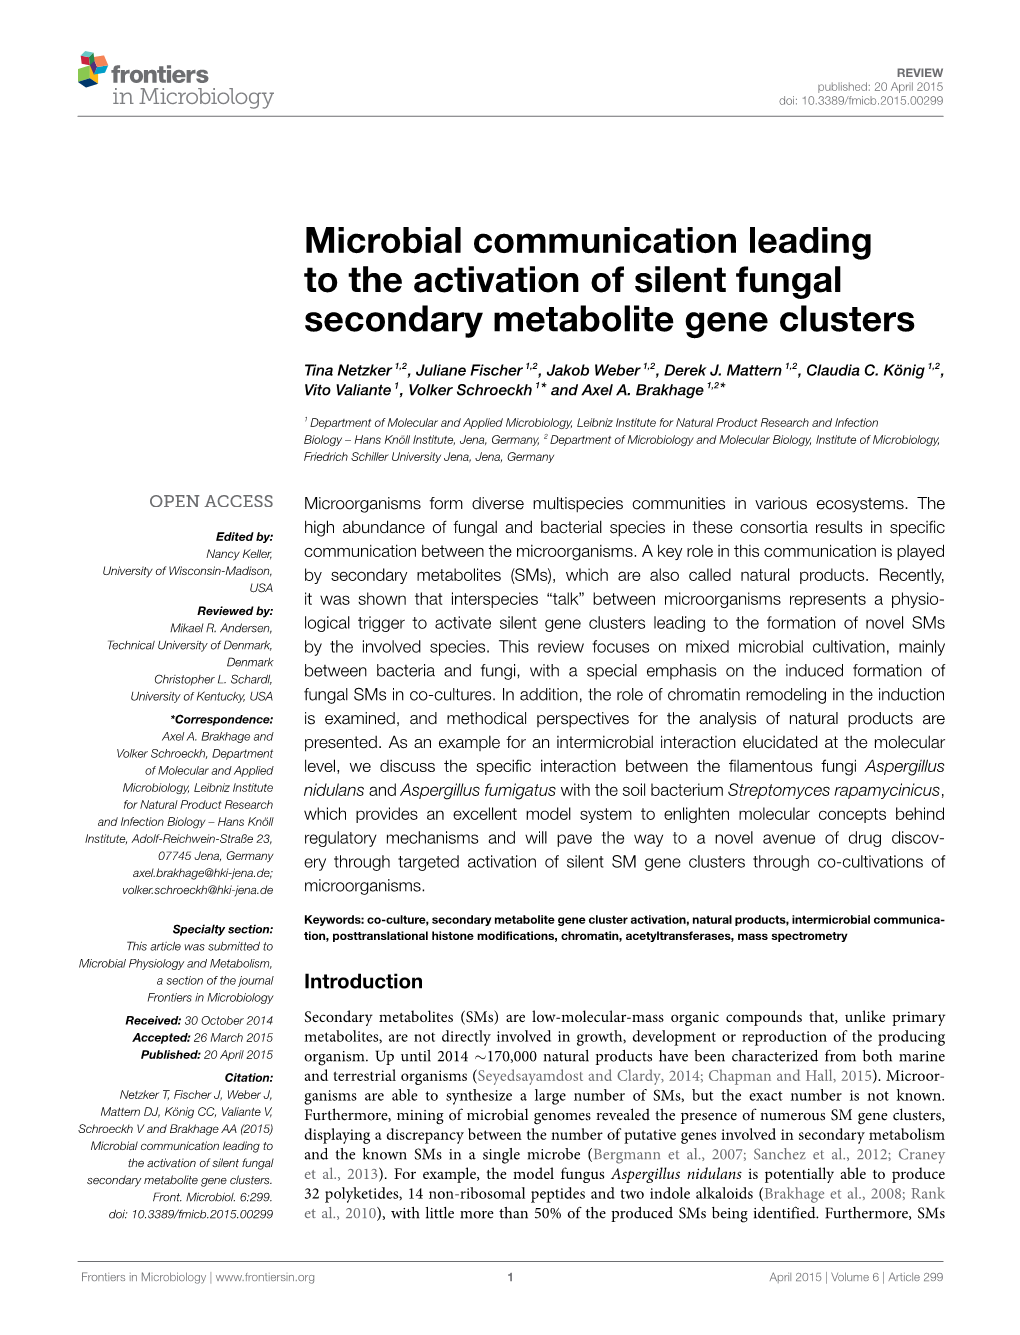 Microbial Communication Leading to the Activation of Silent Fungal Secondary Metabolite Gene Clusters